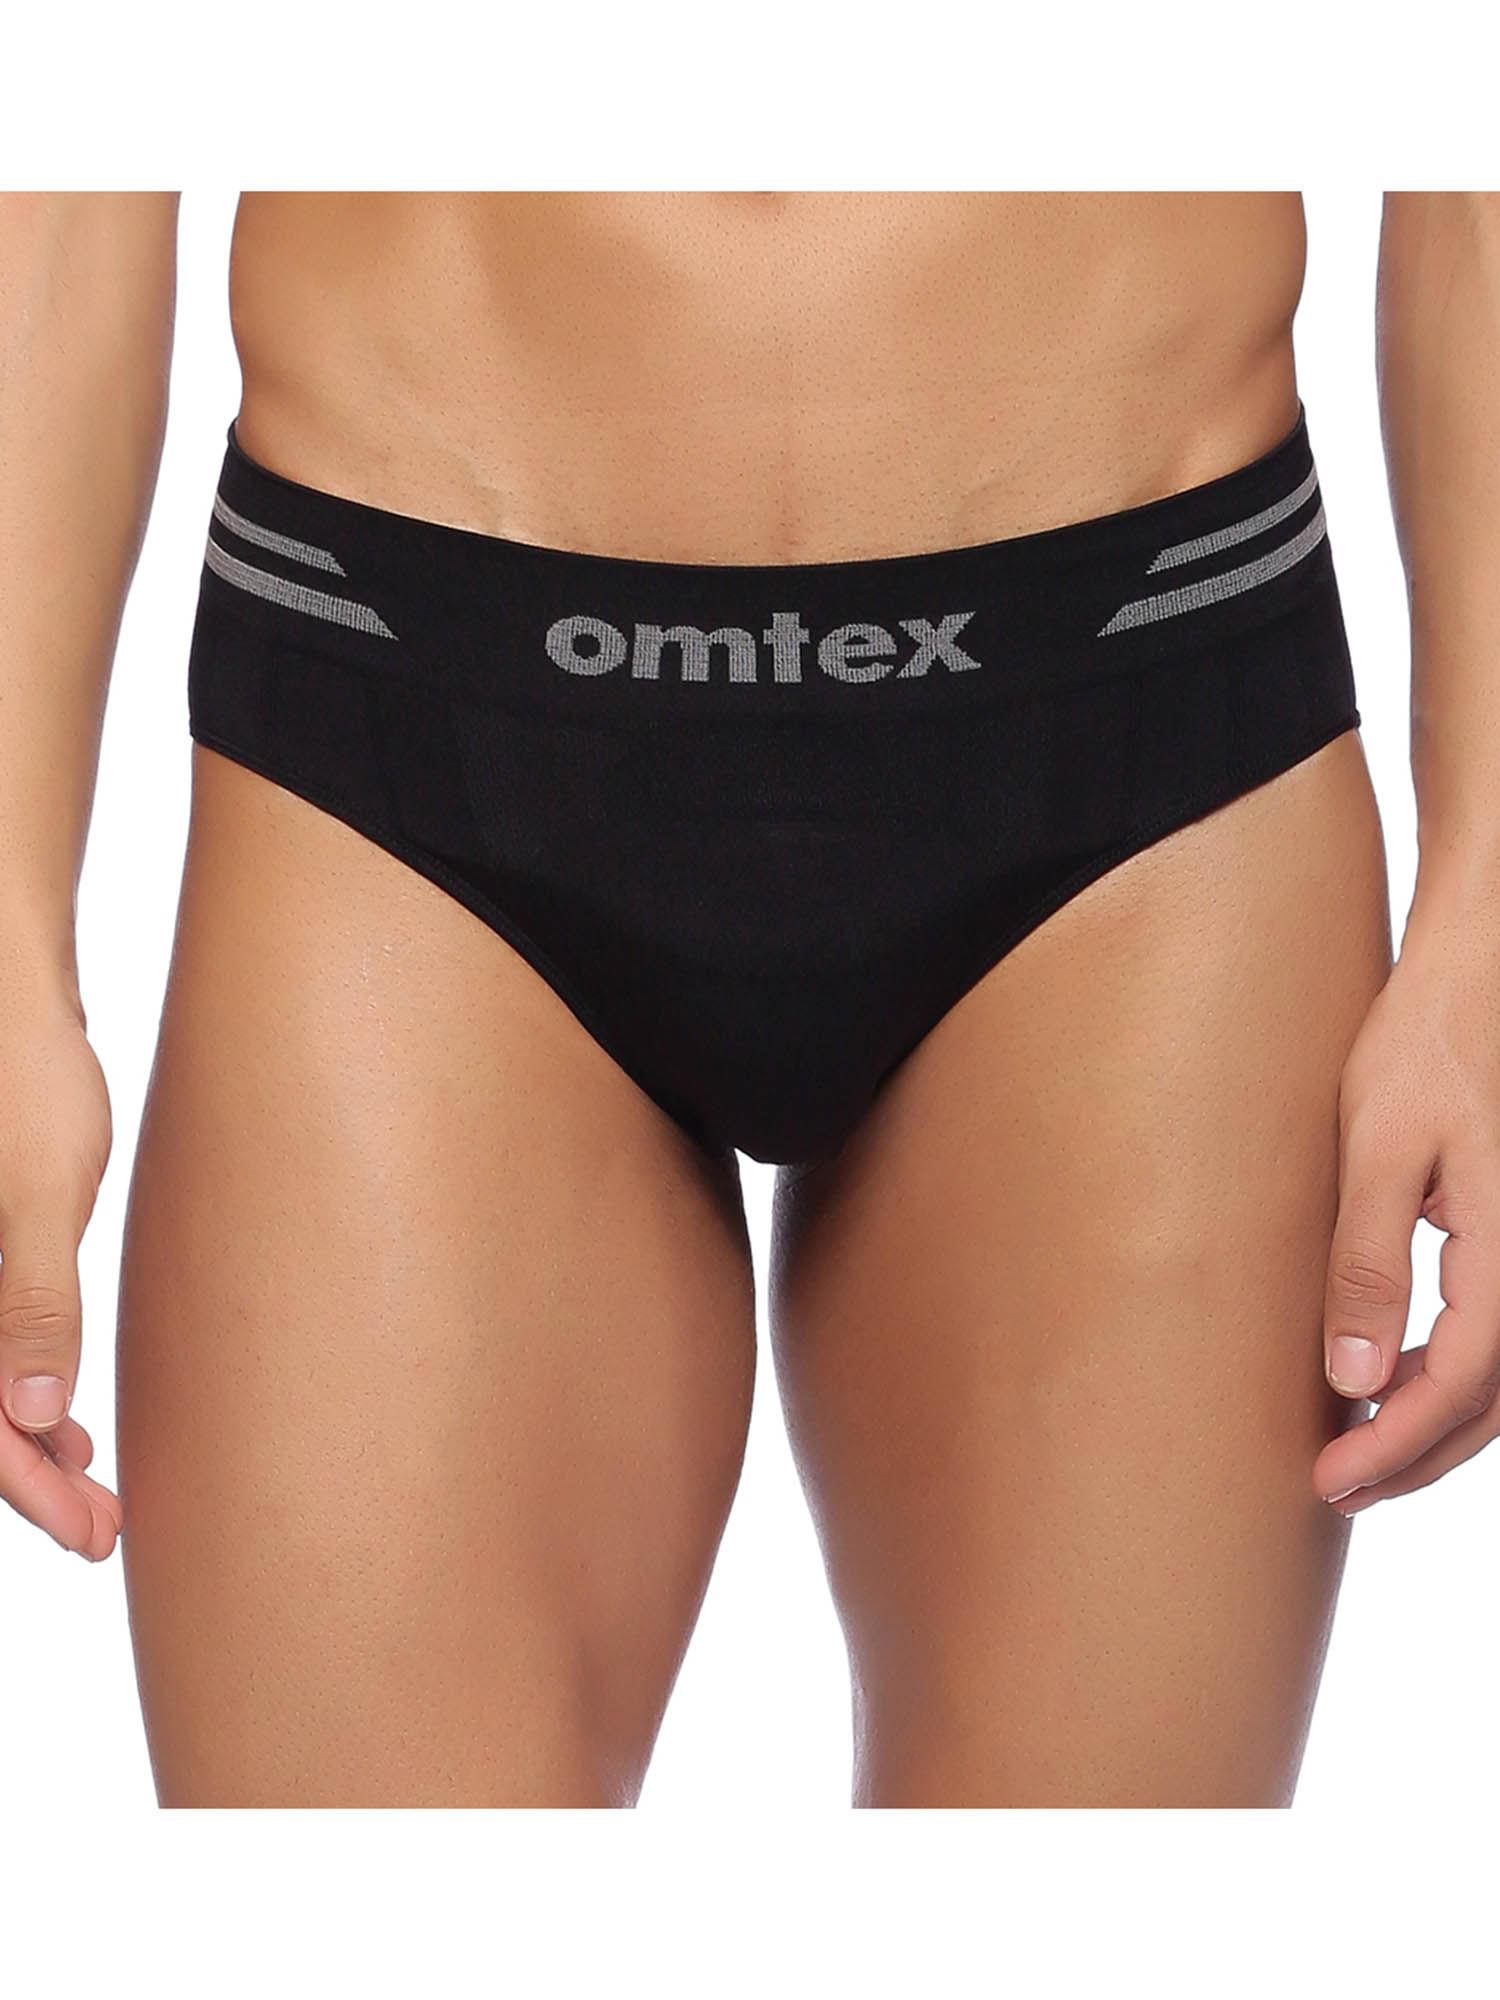 Athletic Seamless Cotton Brief Full Covered - Black